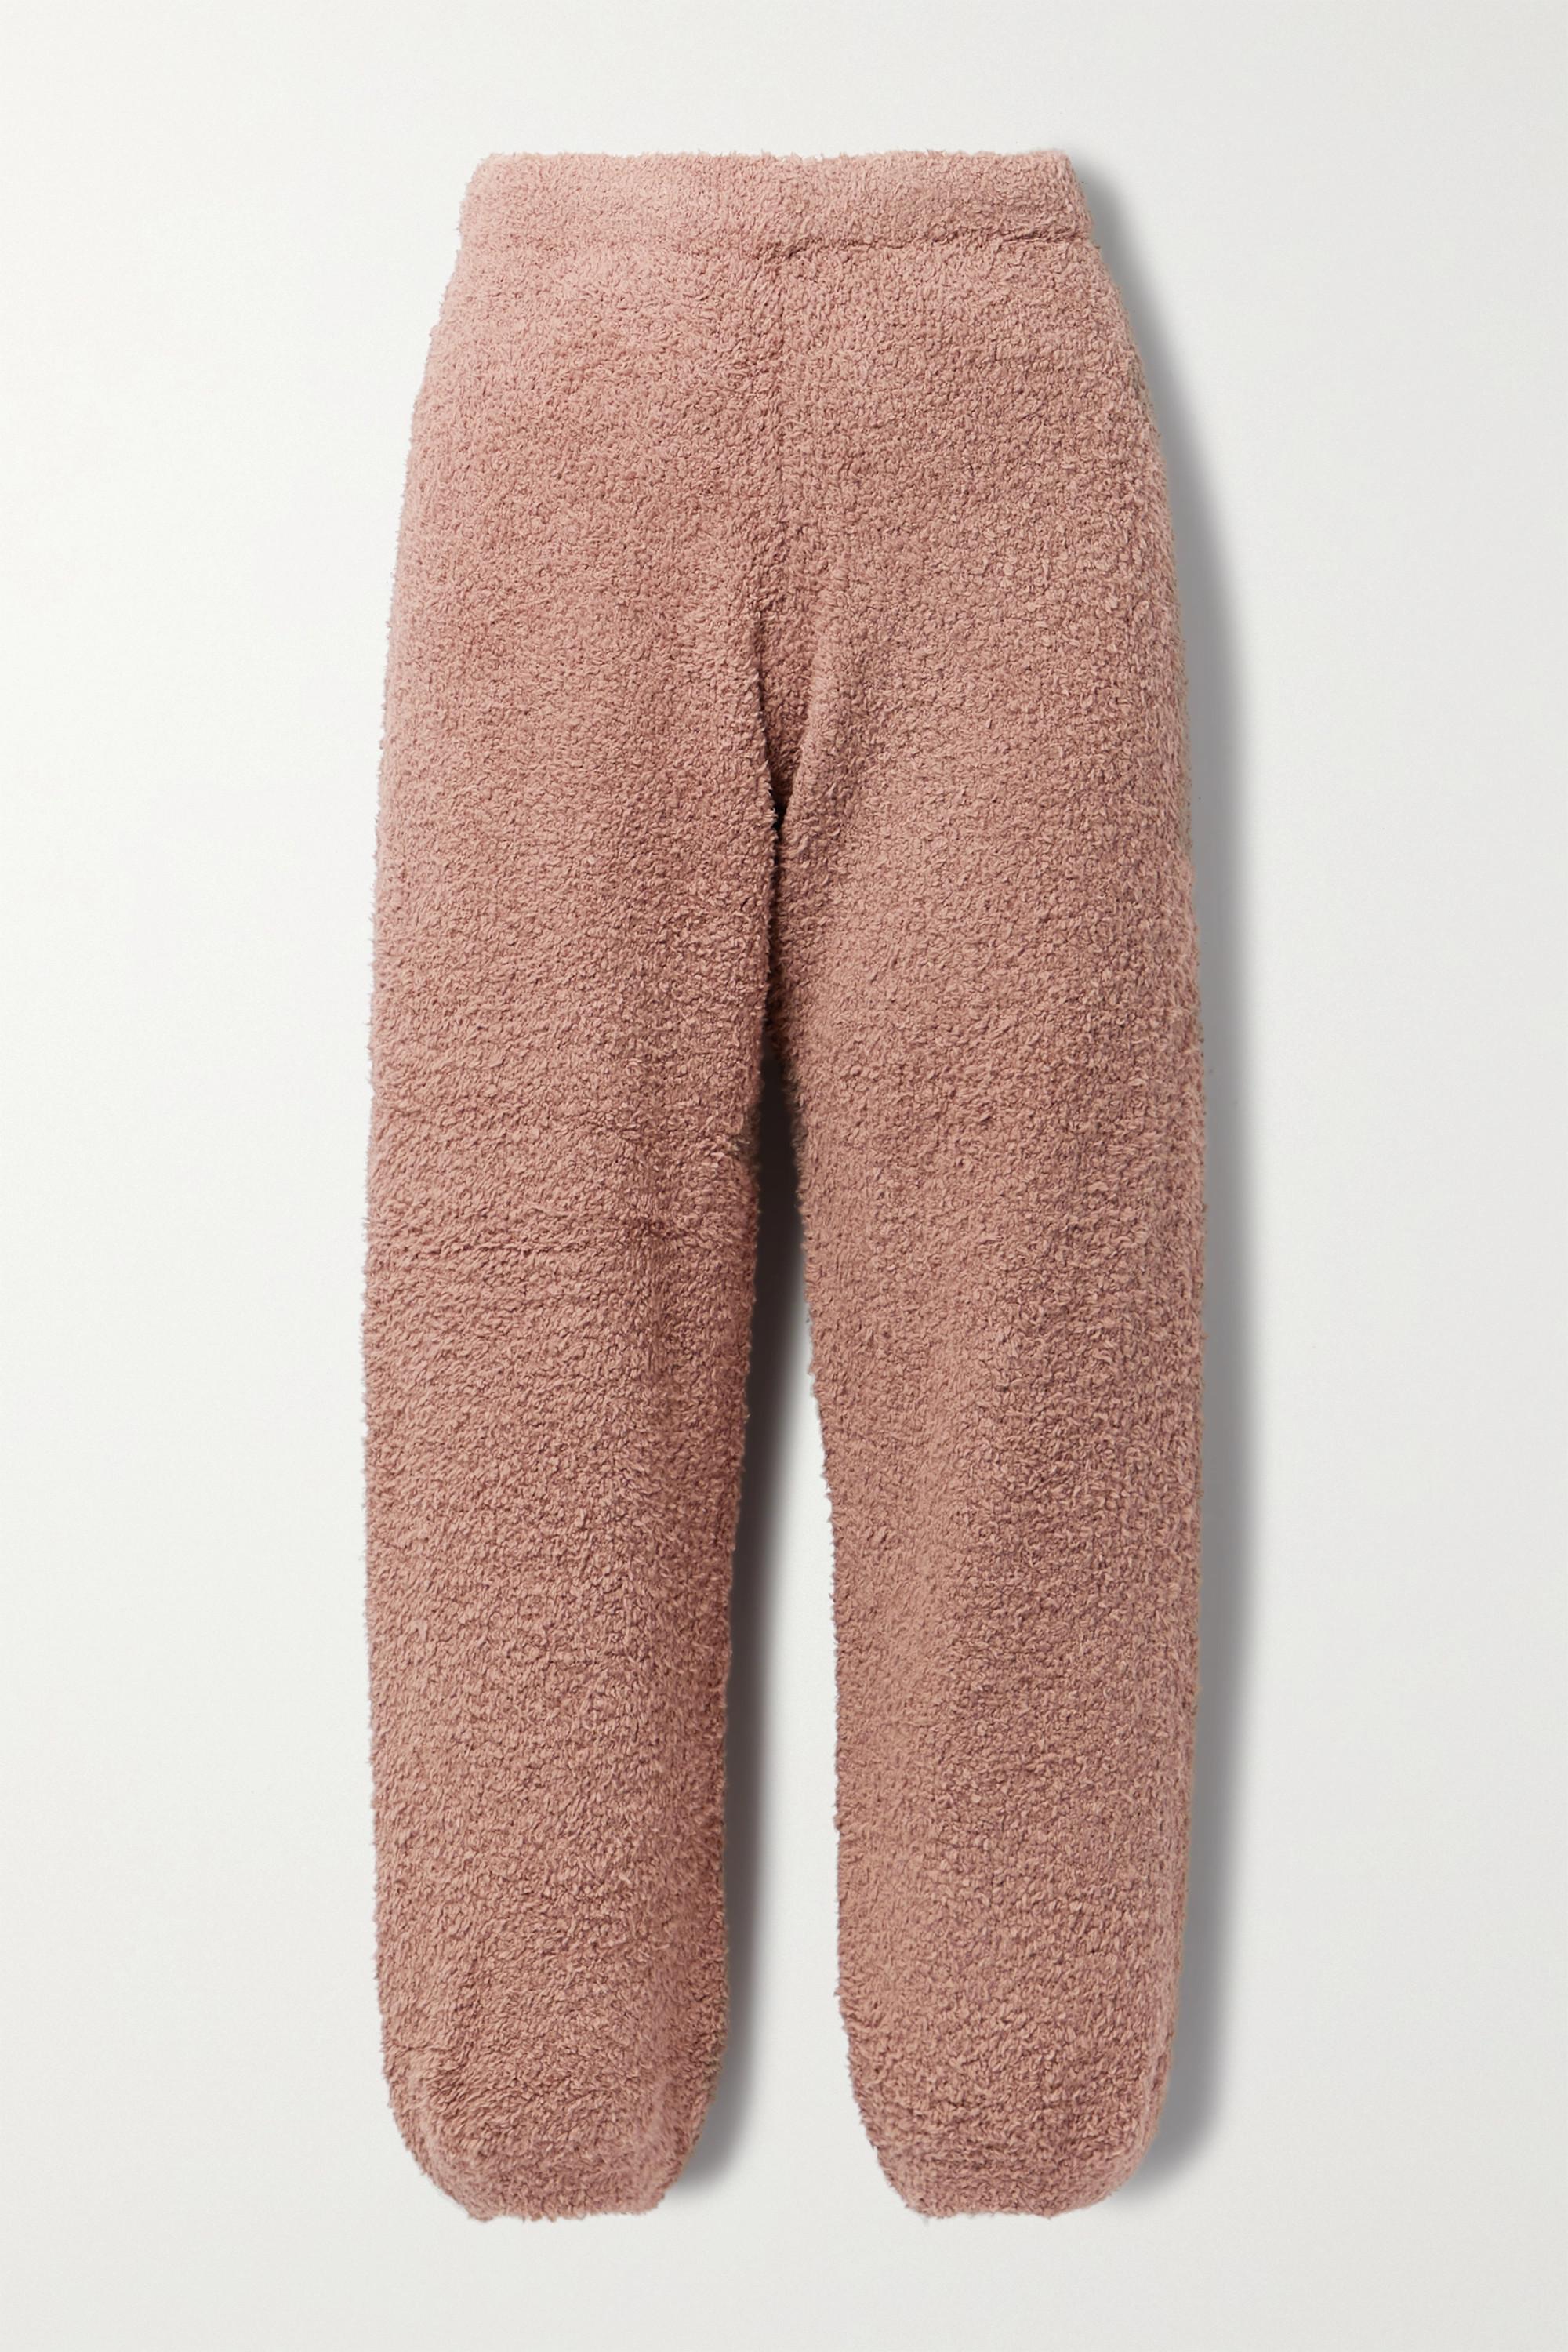 Briefly Stated Mean Girls Pink Cozy Knit Jogger Sleep Pants 